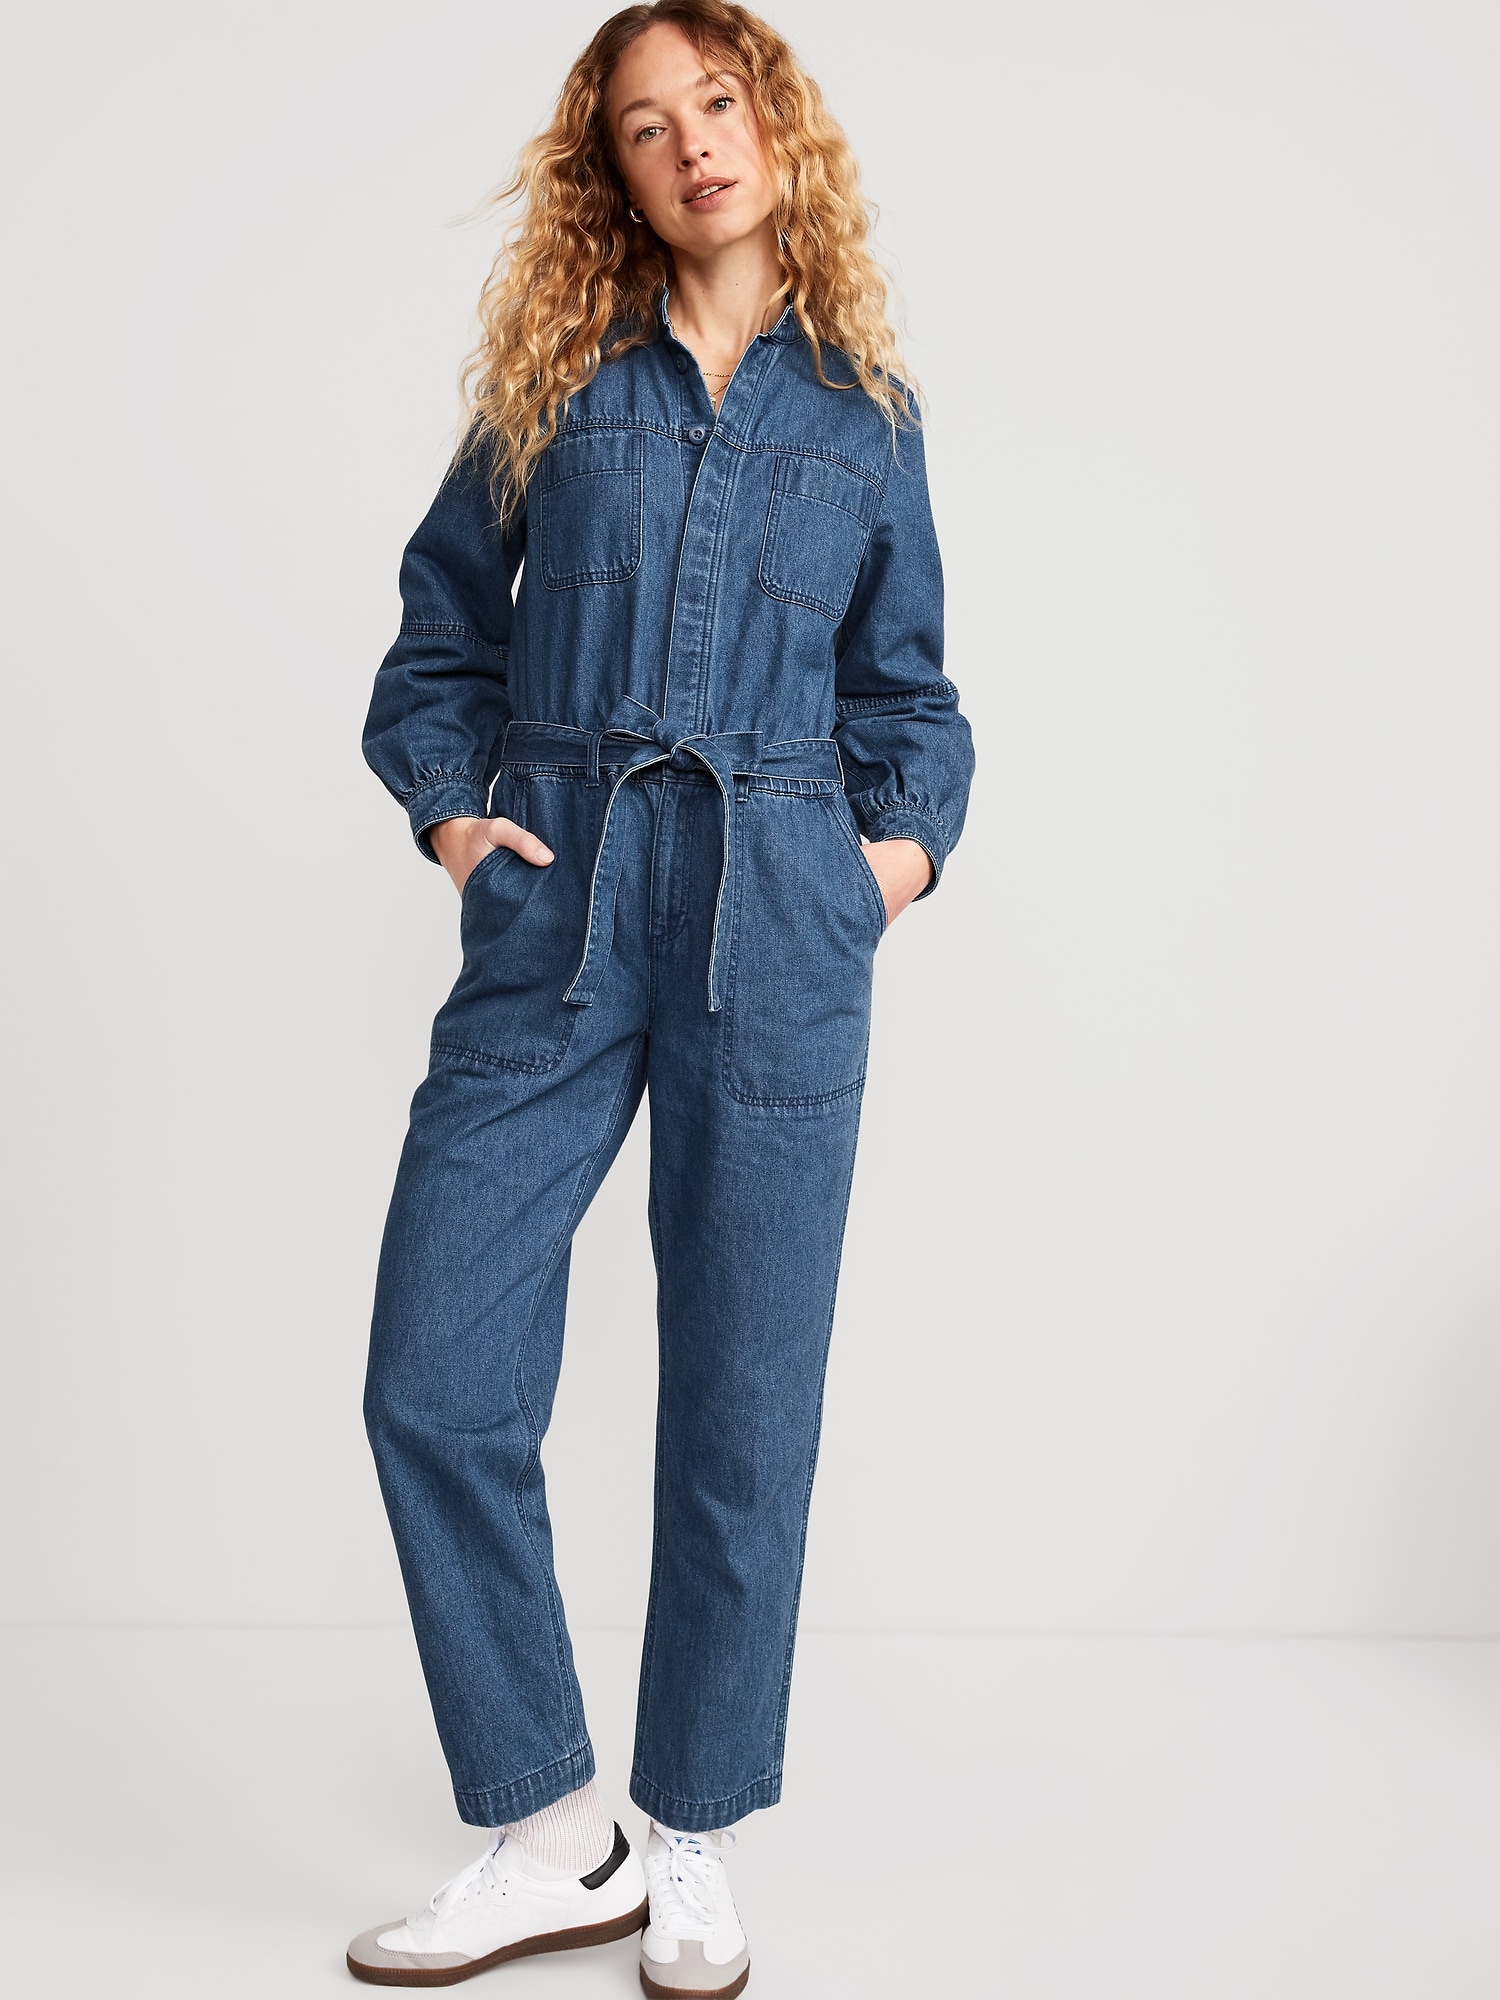 Oldnavy Collarless Jean Utility Jumpsuit for Women